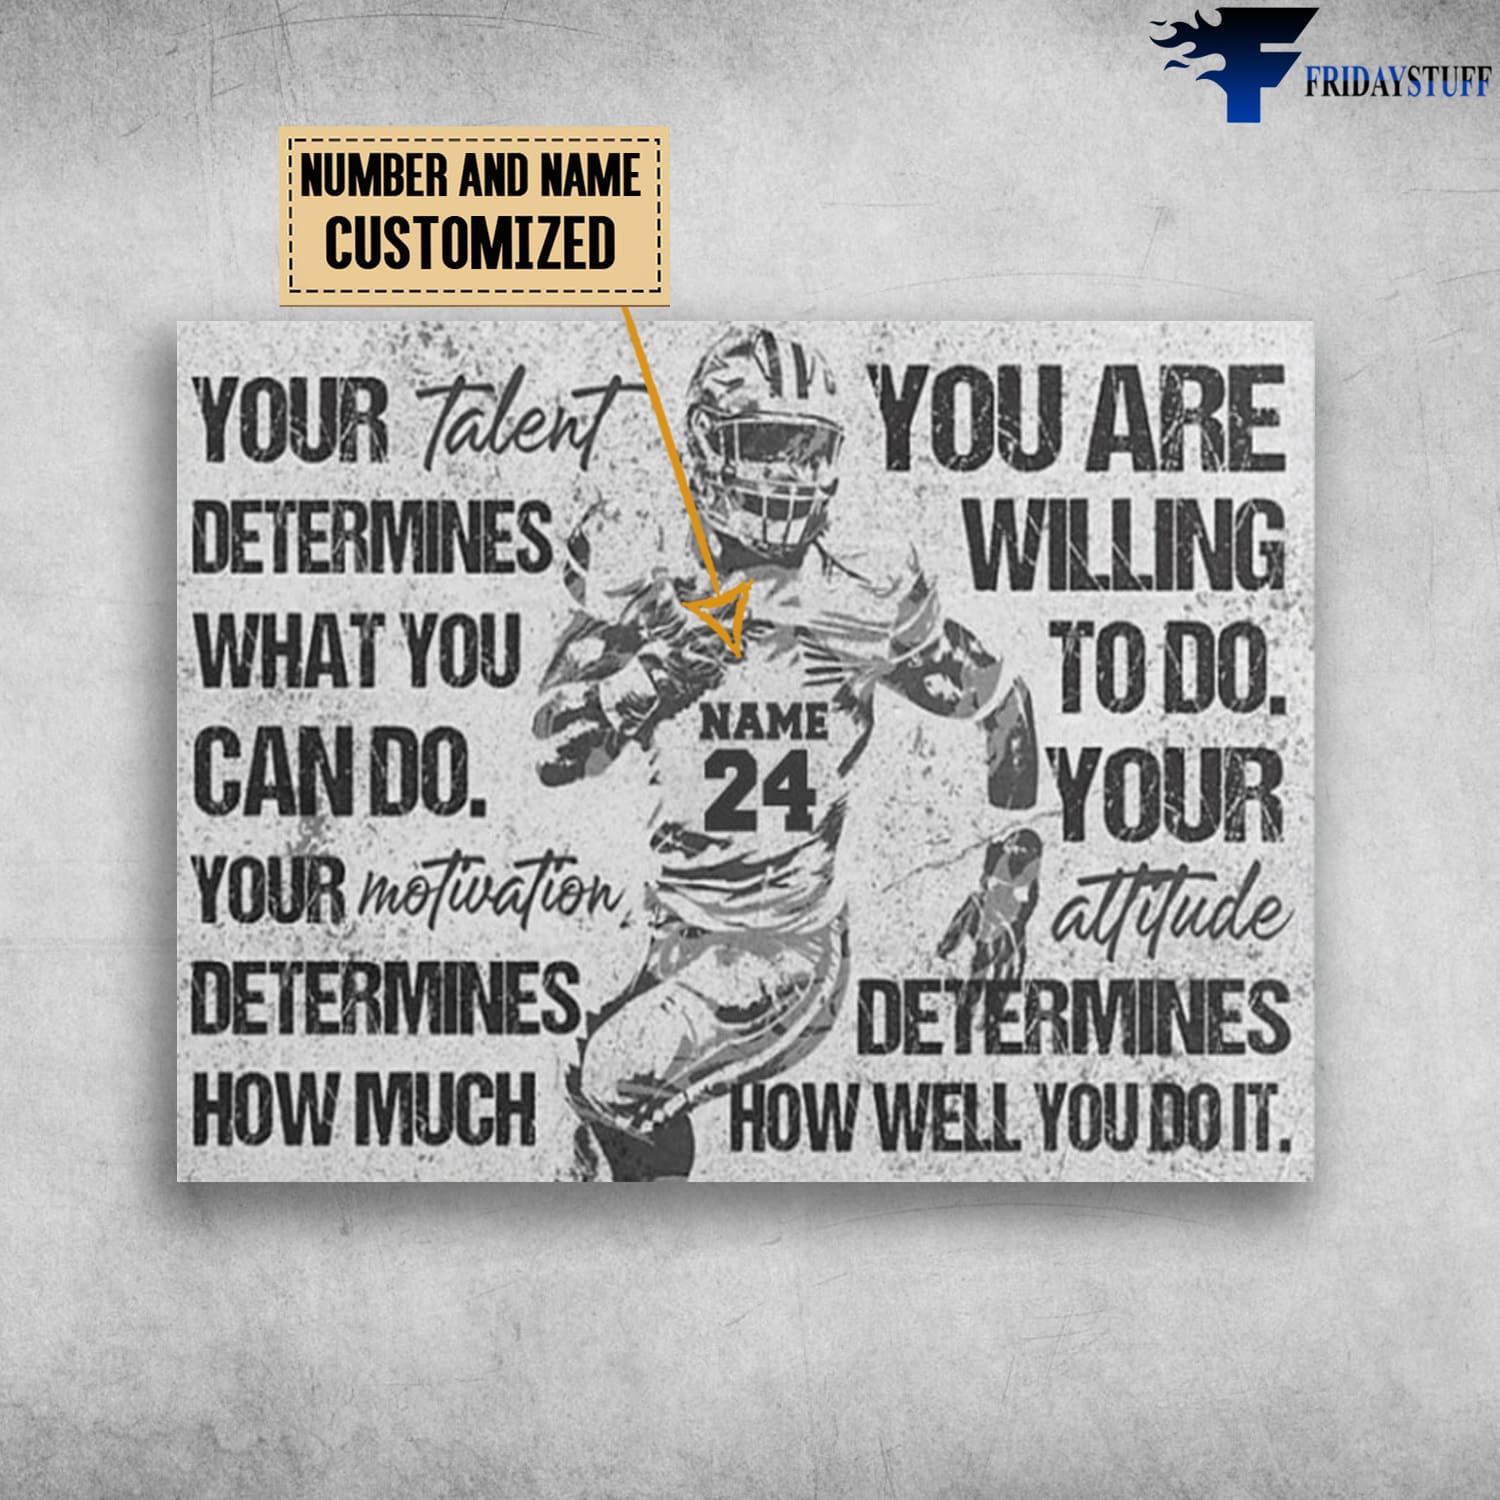 Football Poster, Your Talent Determines What You Can Do, Your Motivation, Determines How Much You Are Willing To Do, Your Attitide Determines How Well You Do It